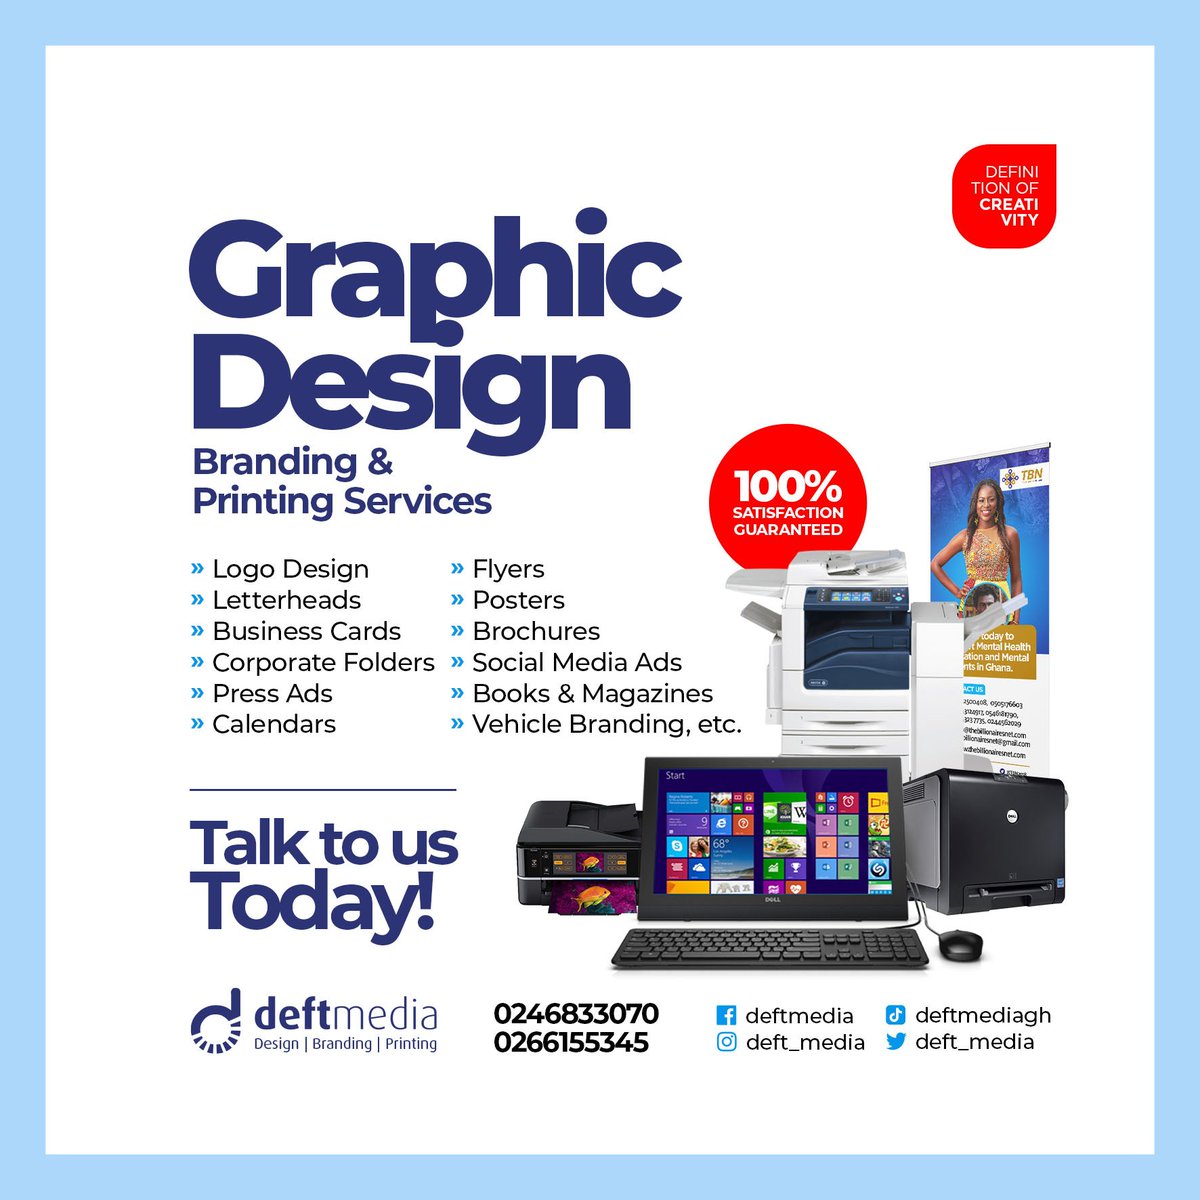 Graphic Design, Branding and Printing services #graphicdesign #branding #identitydesign #designstudio #ghana